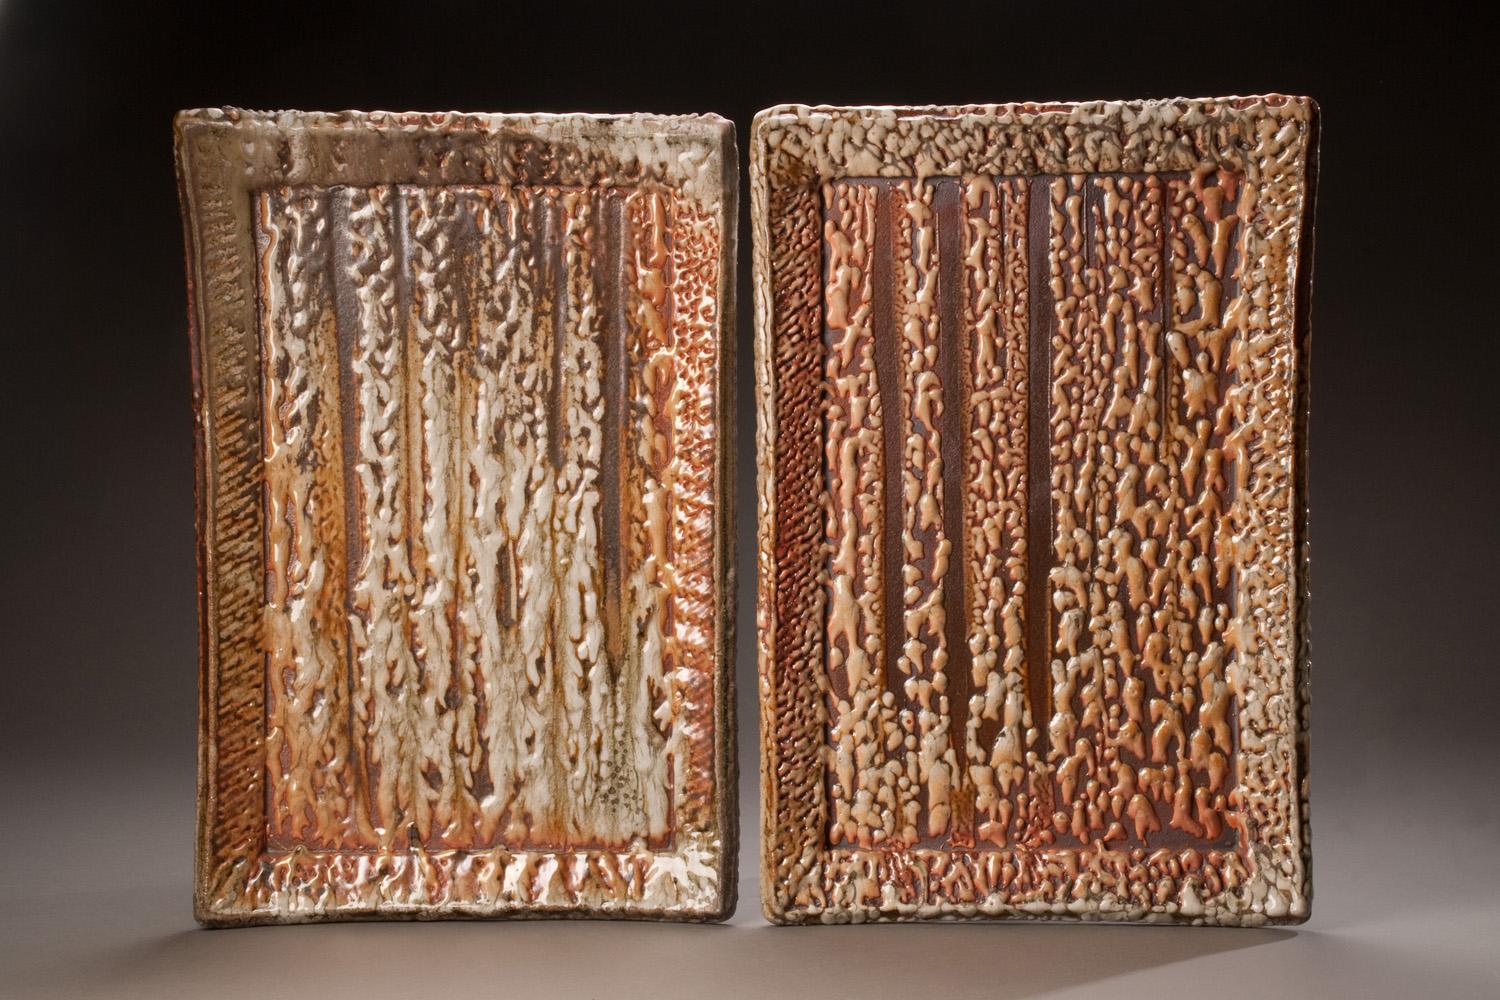 Tony Moore Abstract Sculpture - 'Fire Painting Diptych #19 & 18.7.13'